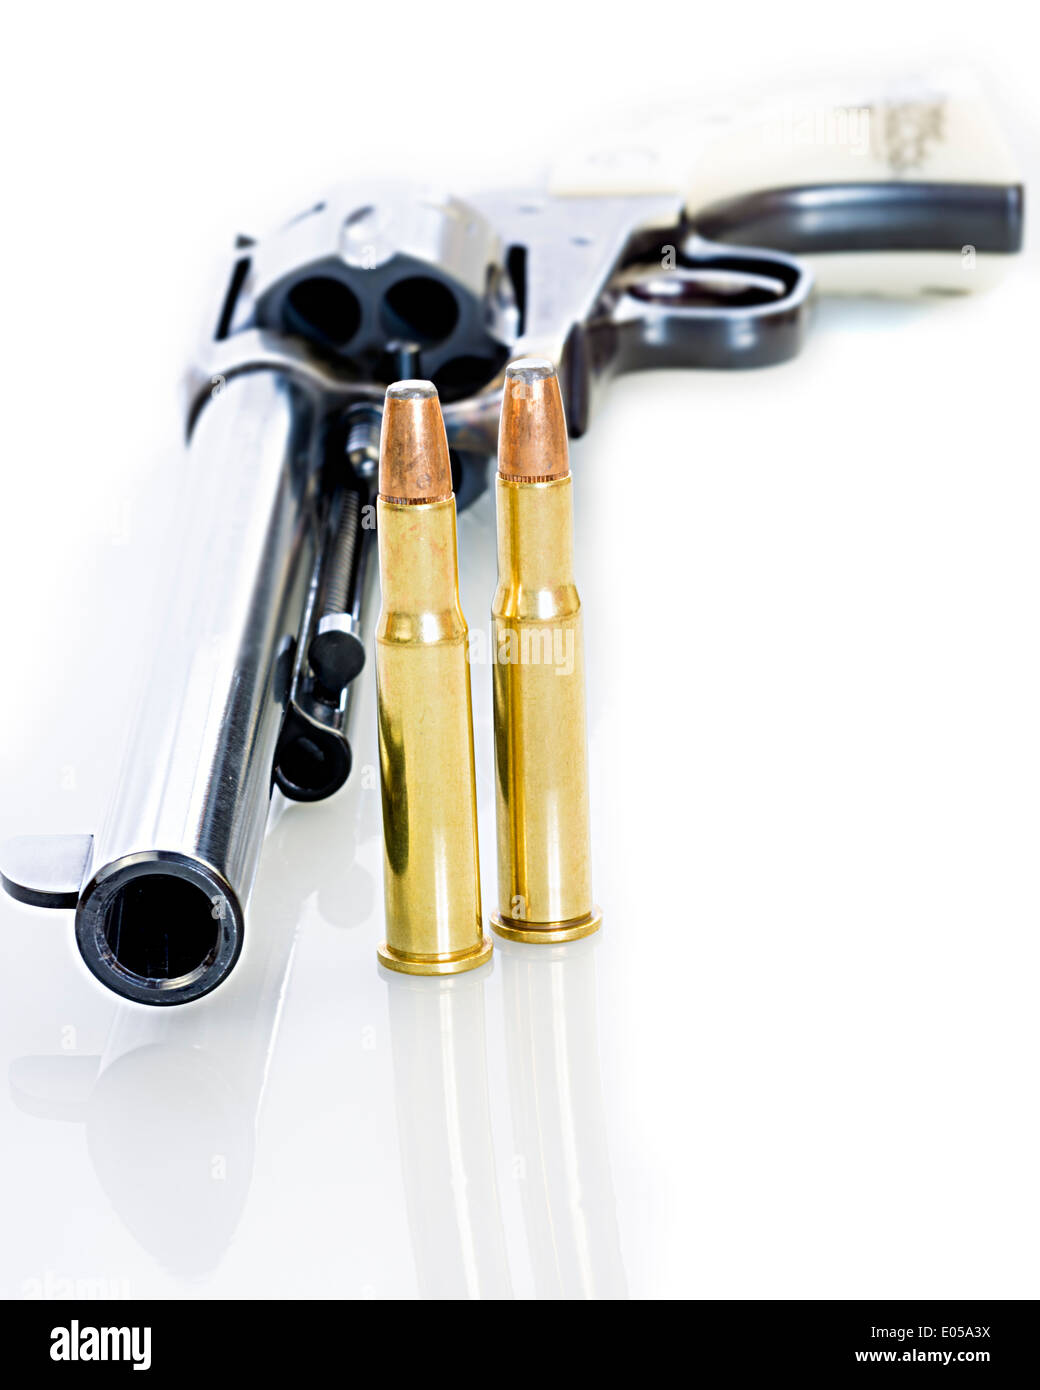 Bullets and Pistol Barrel on white Stock Photo